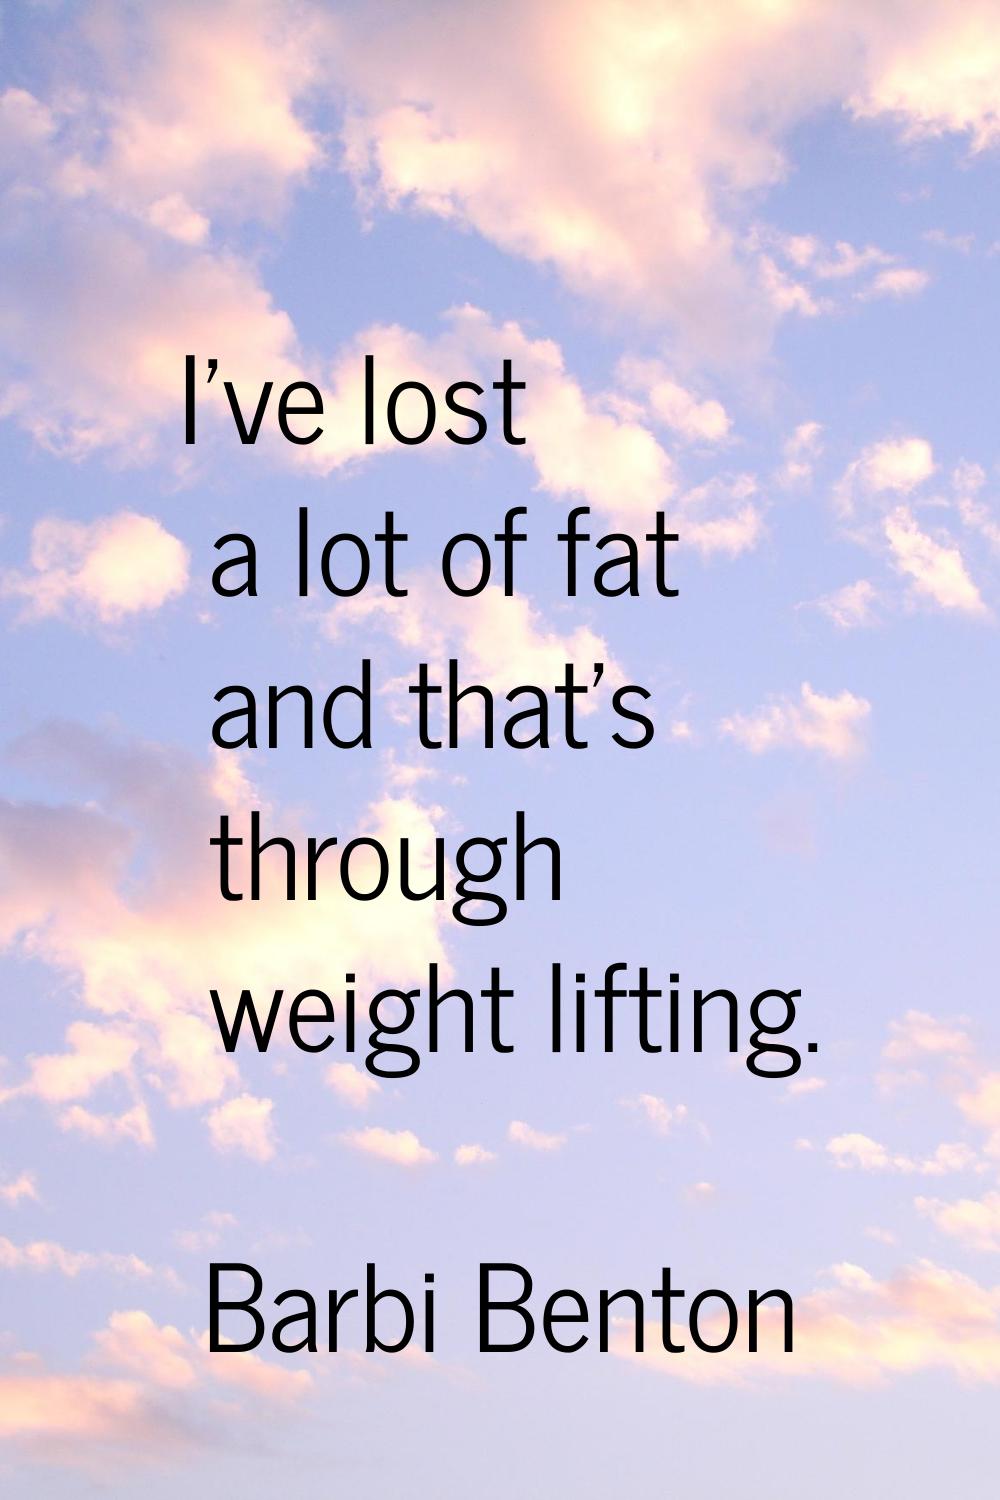 I've lost a lot of fat and that's through weight lifting.